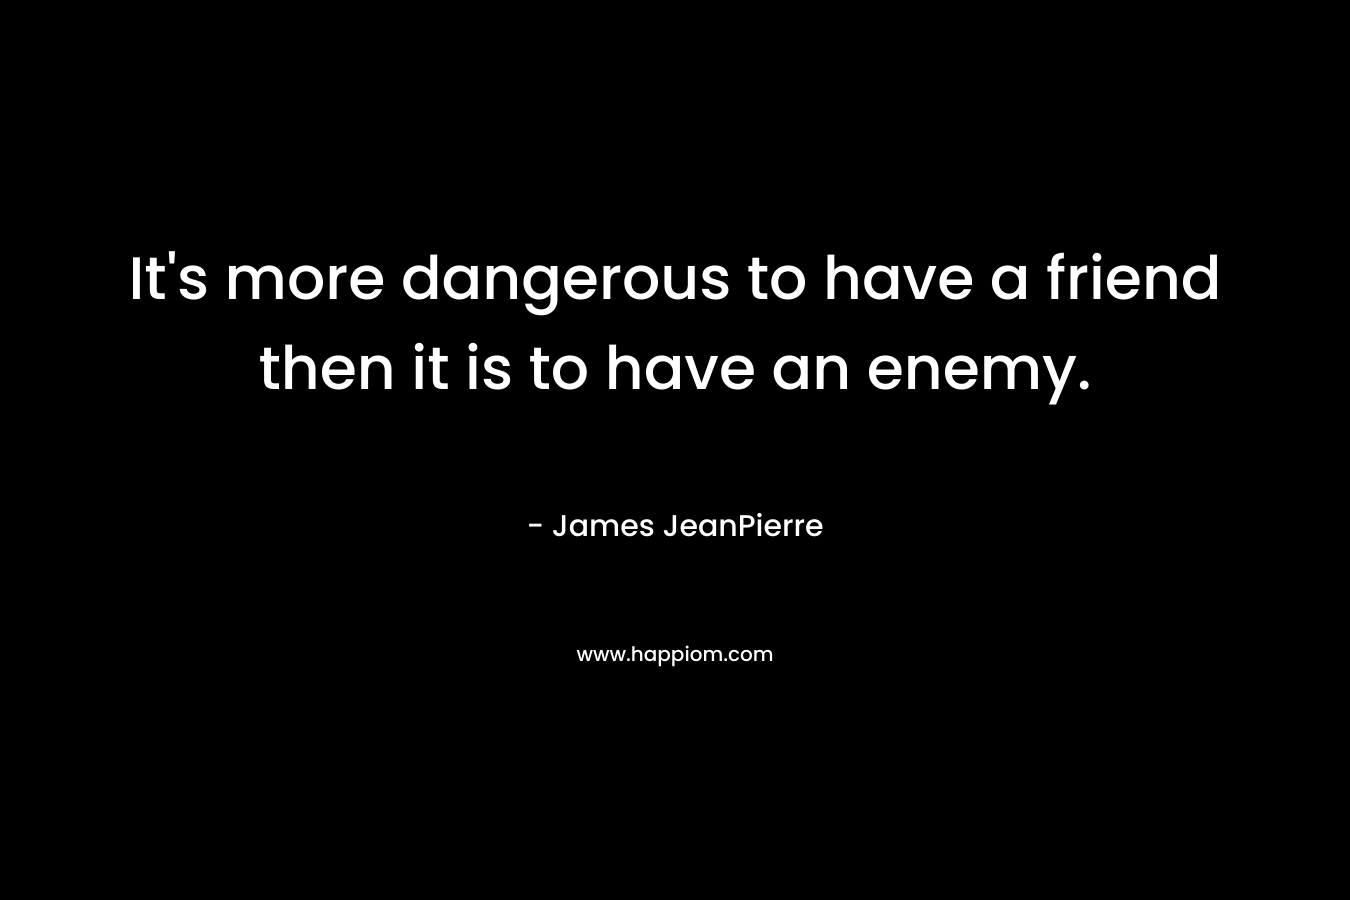 It’s more dangerous to have a friend then it is to have an enemy. – James JeanPierre